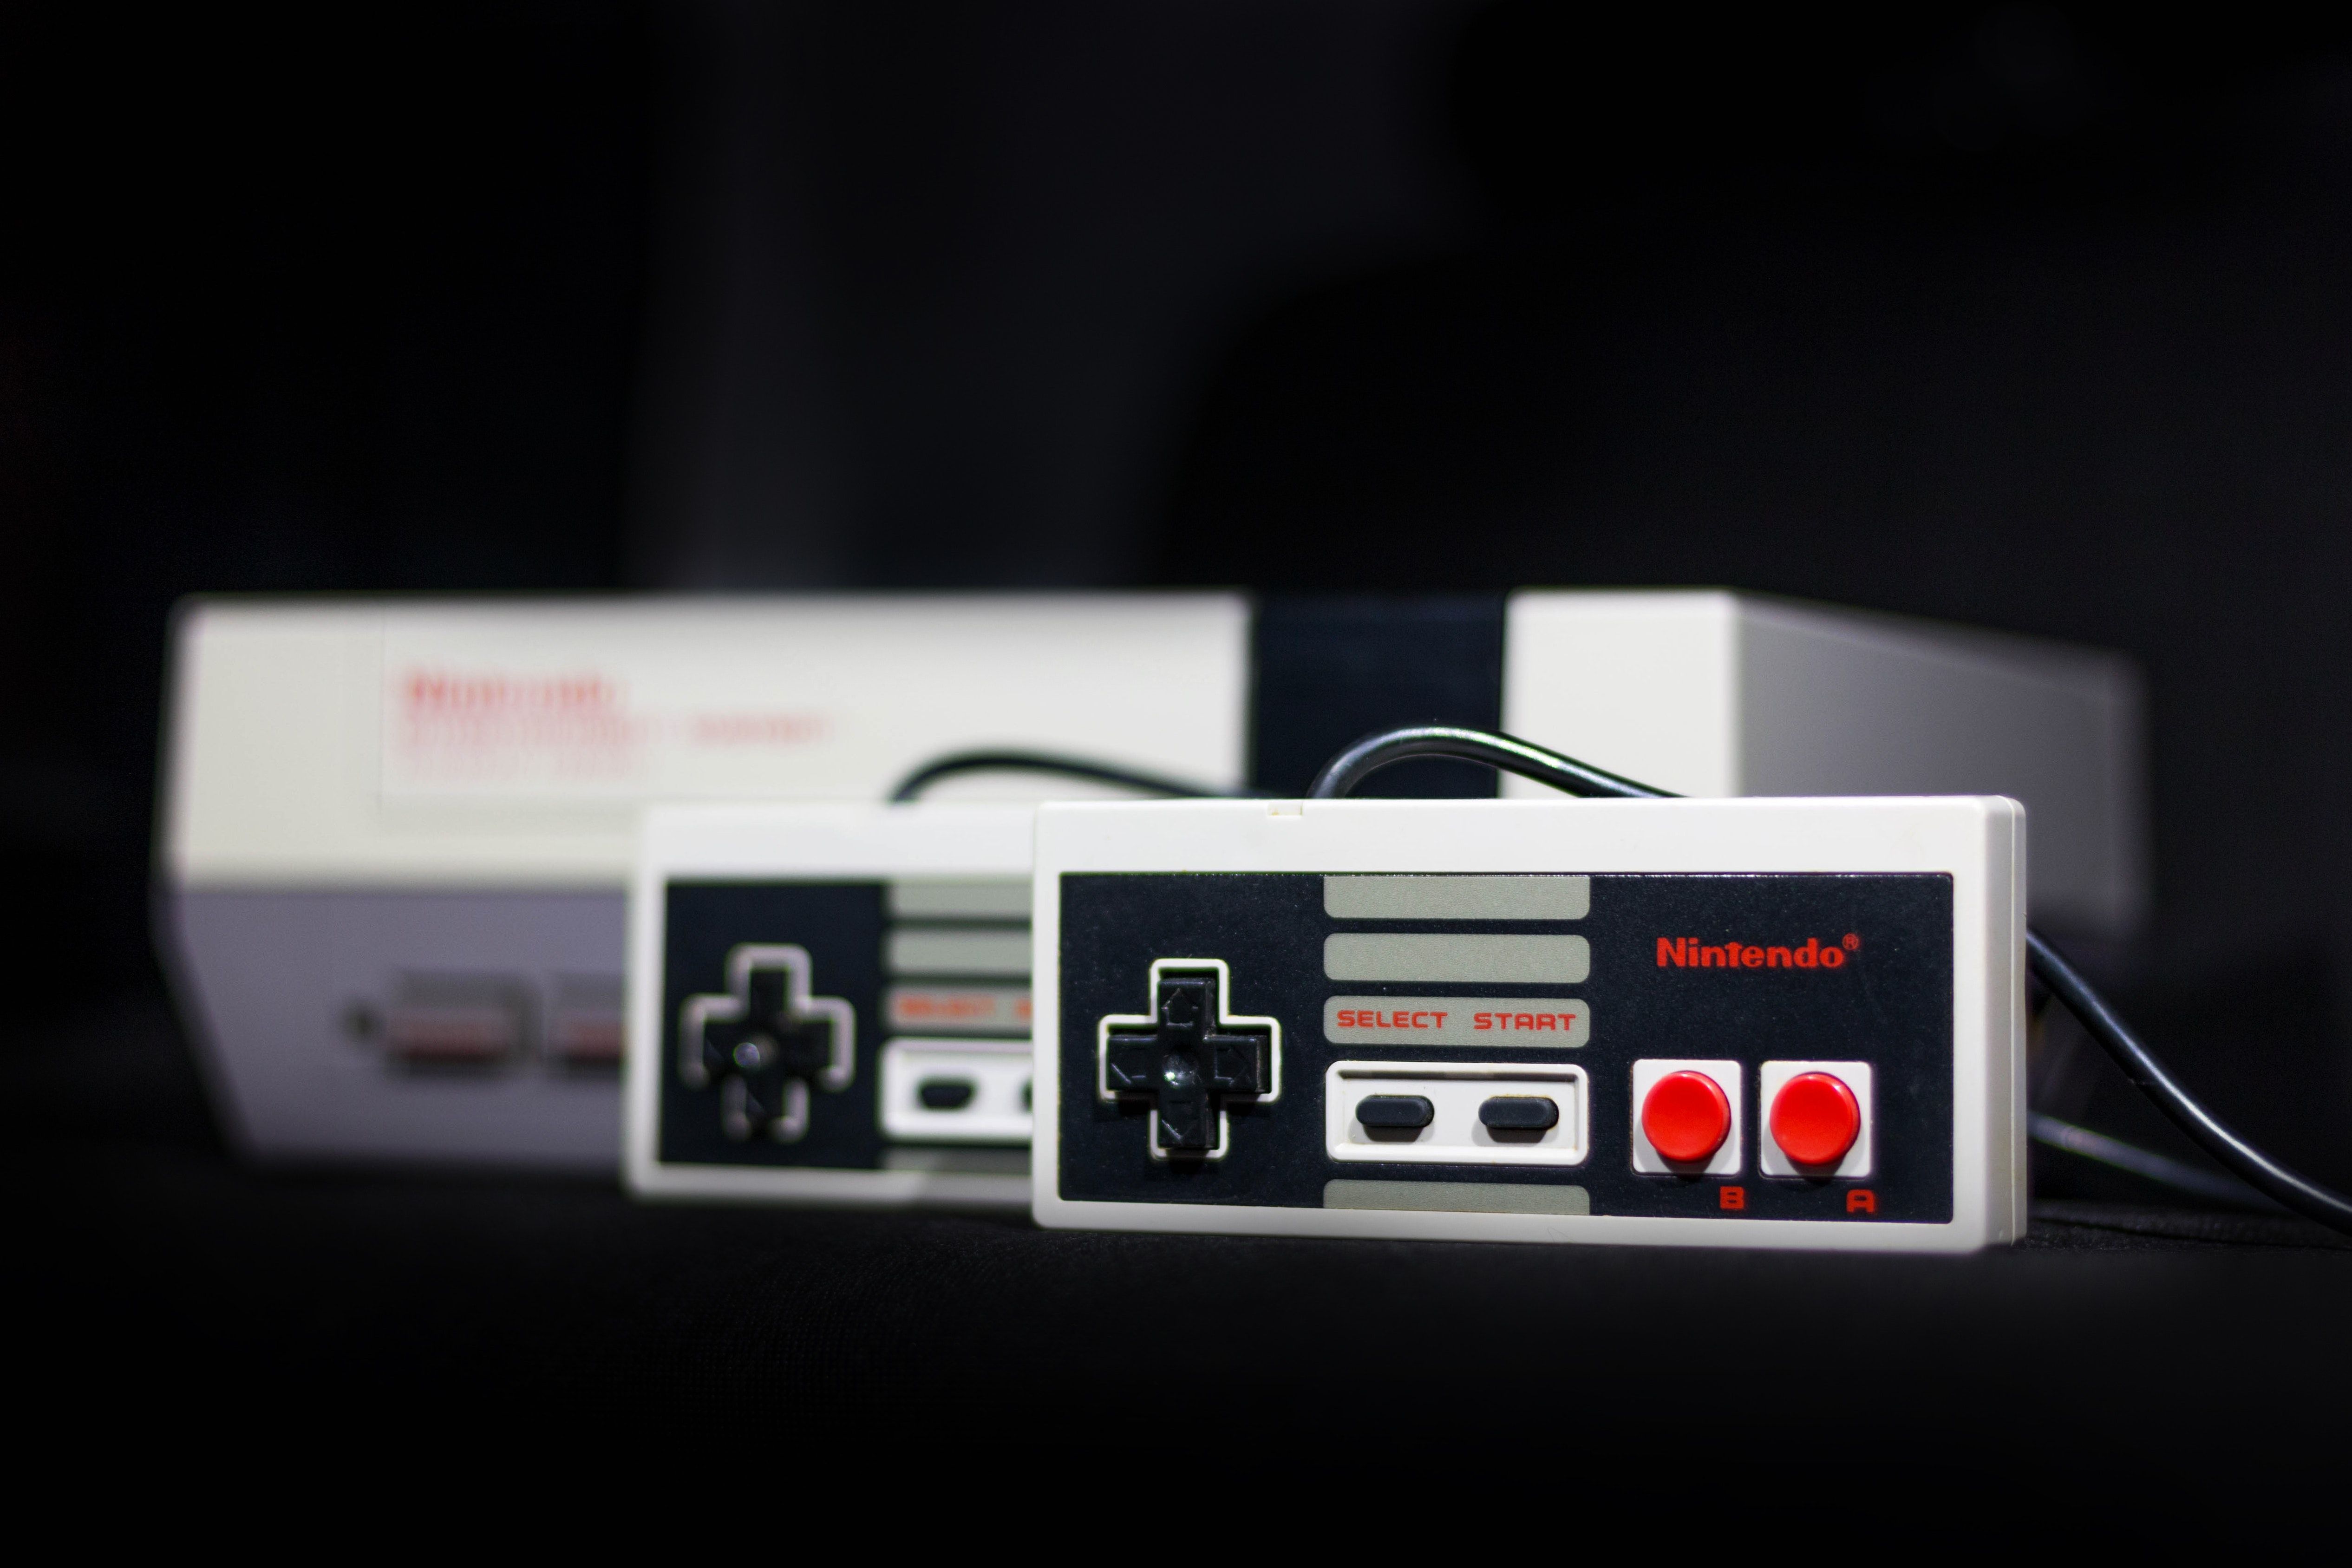 Nintendo Entertainment System with Controllers In Focus